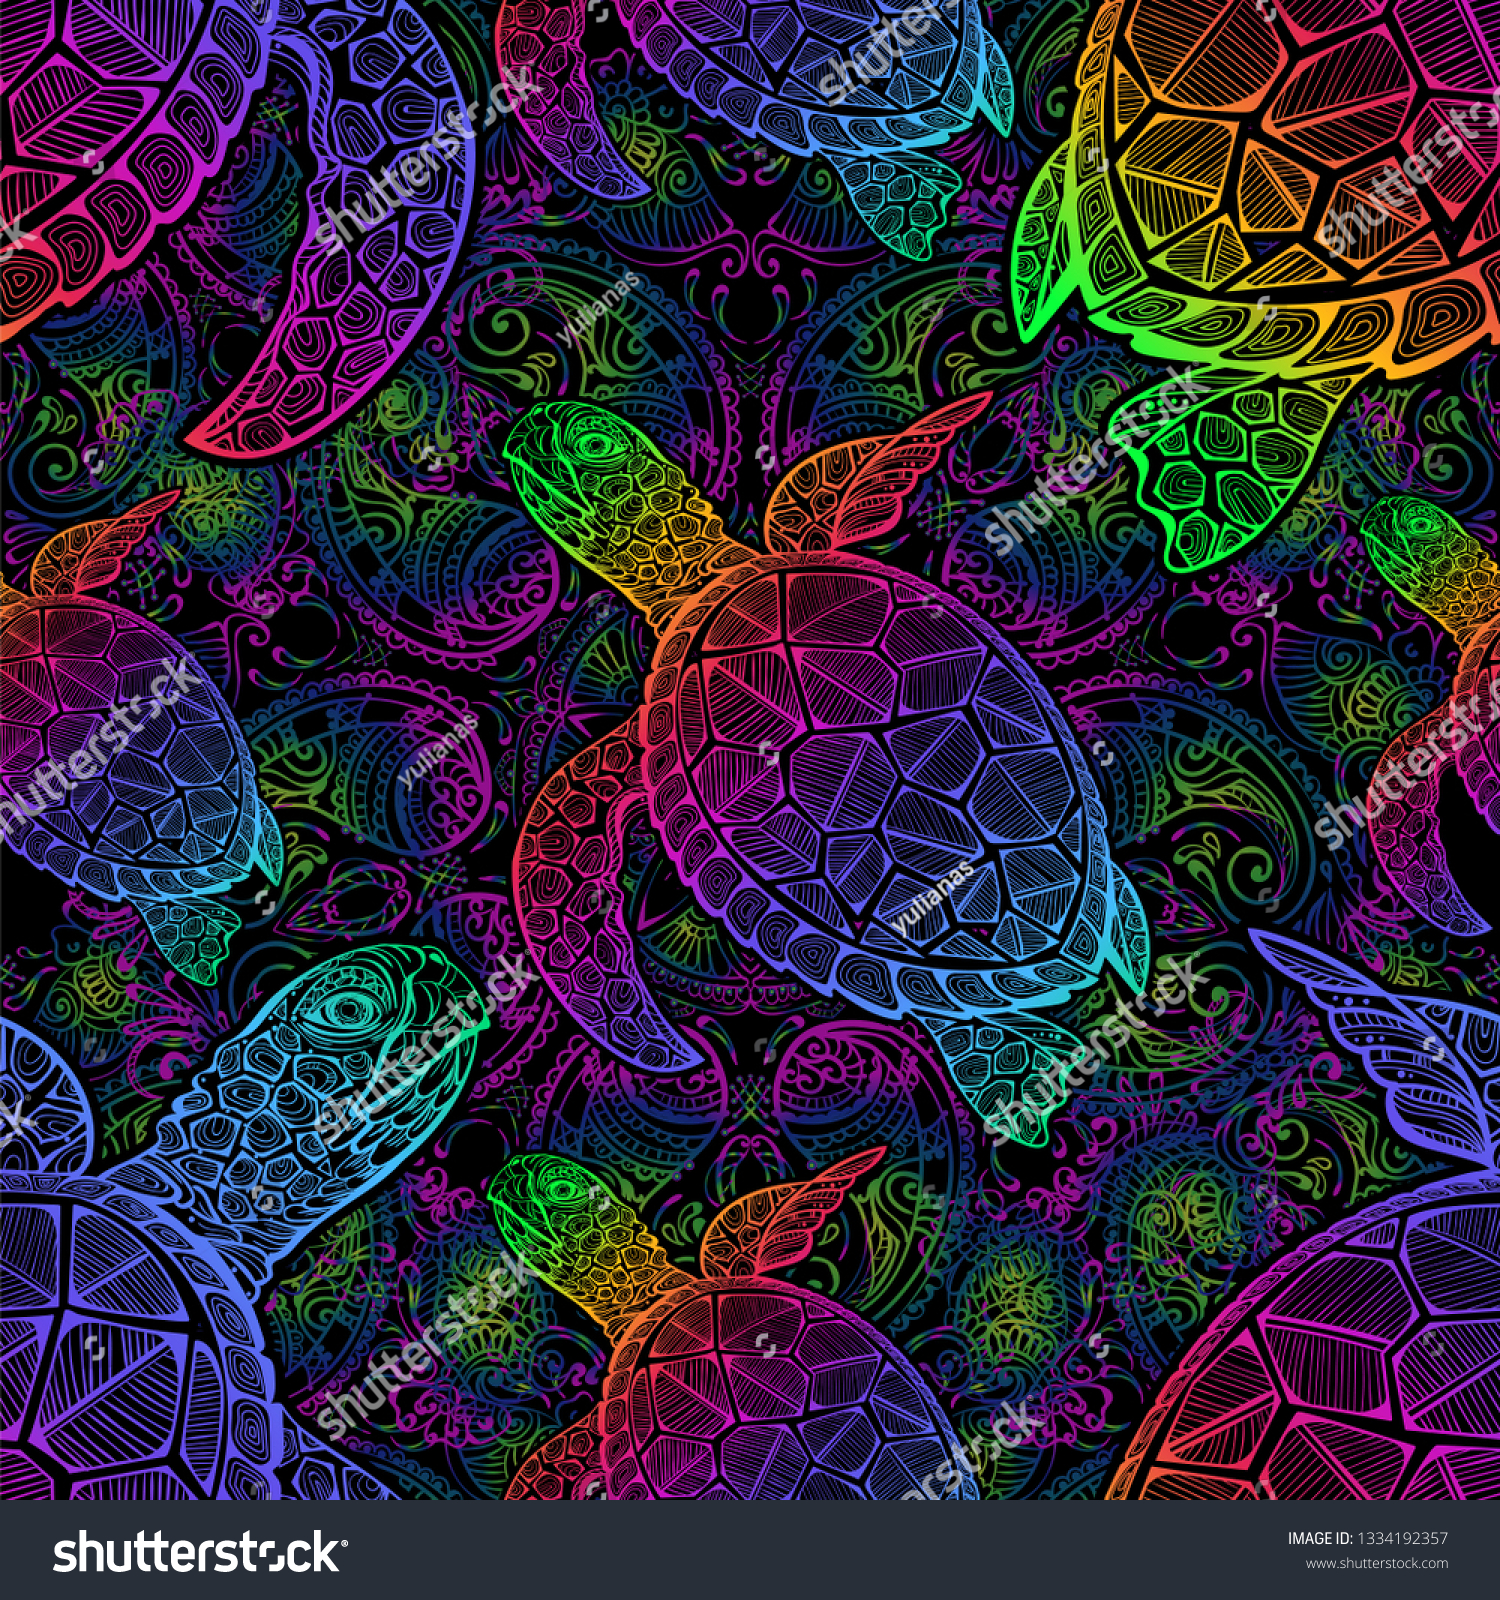 SVG of Sea turtle in psychedelic multicolor colors with lotuses and mandala in the style of boho - seamless pattern svg